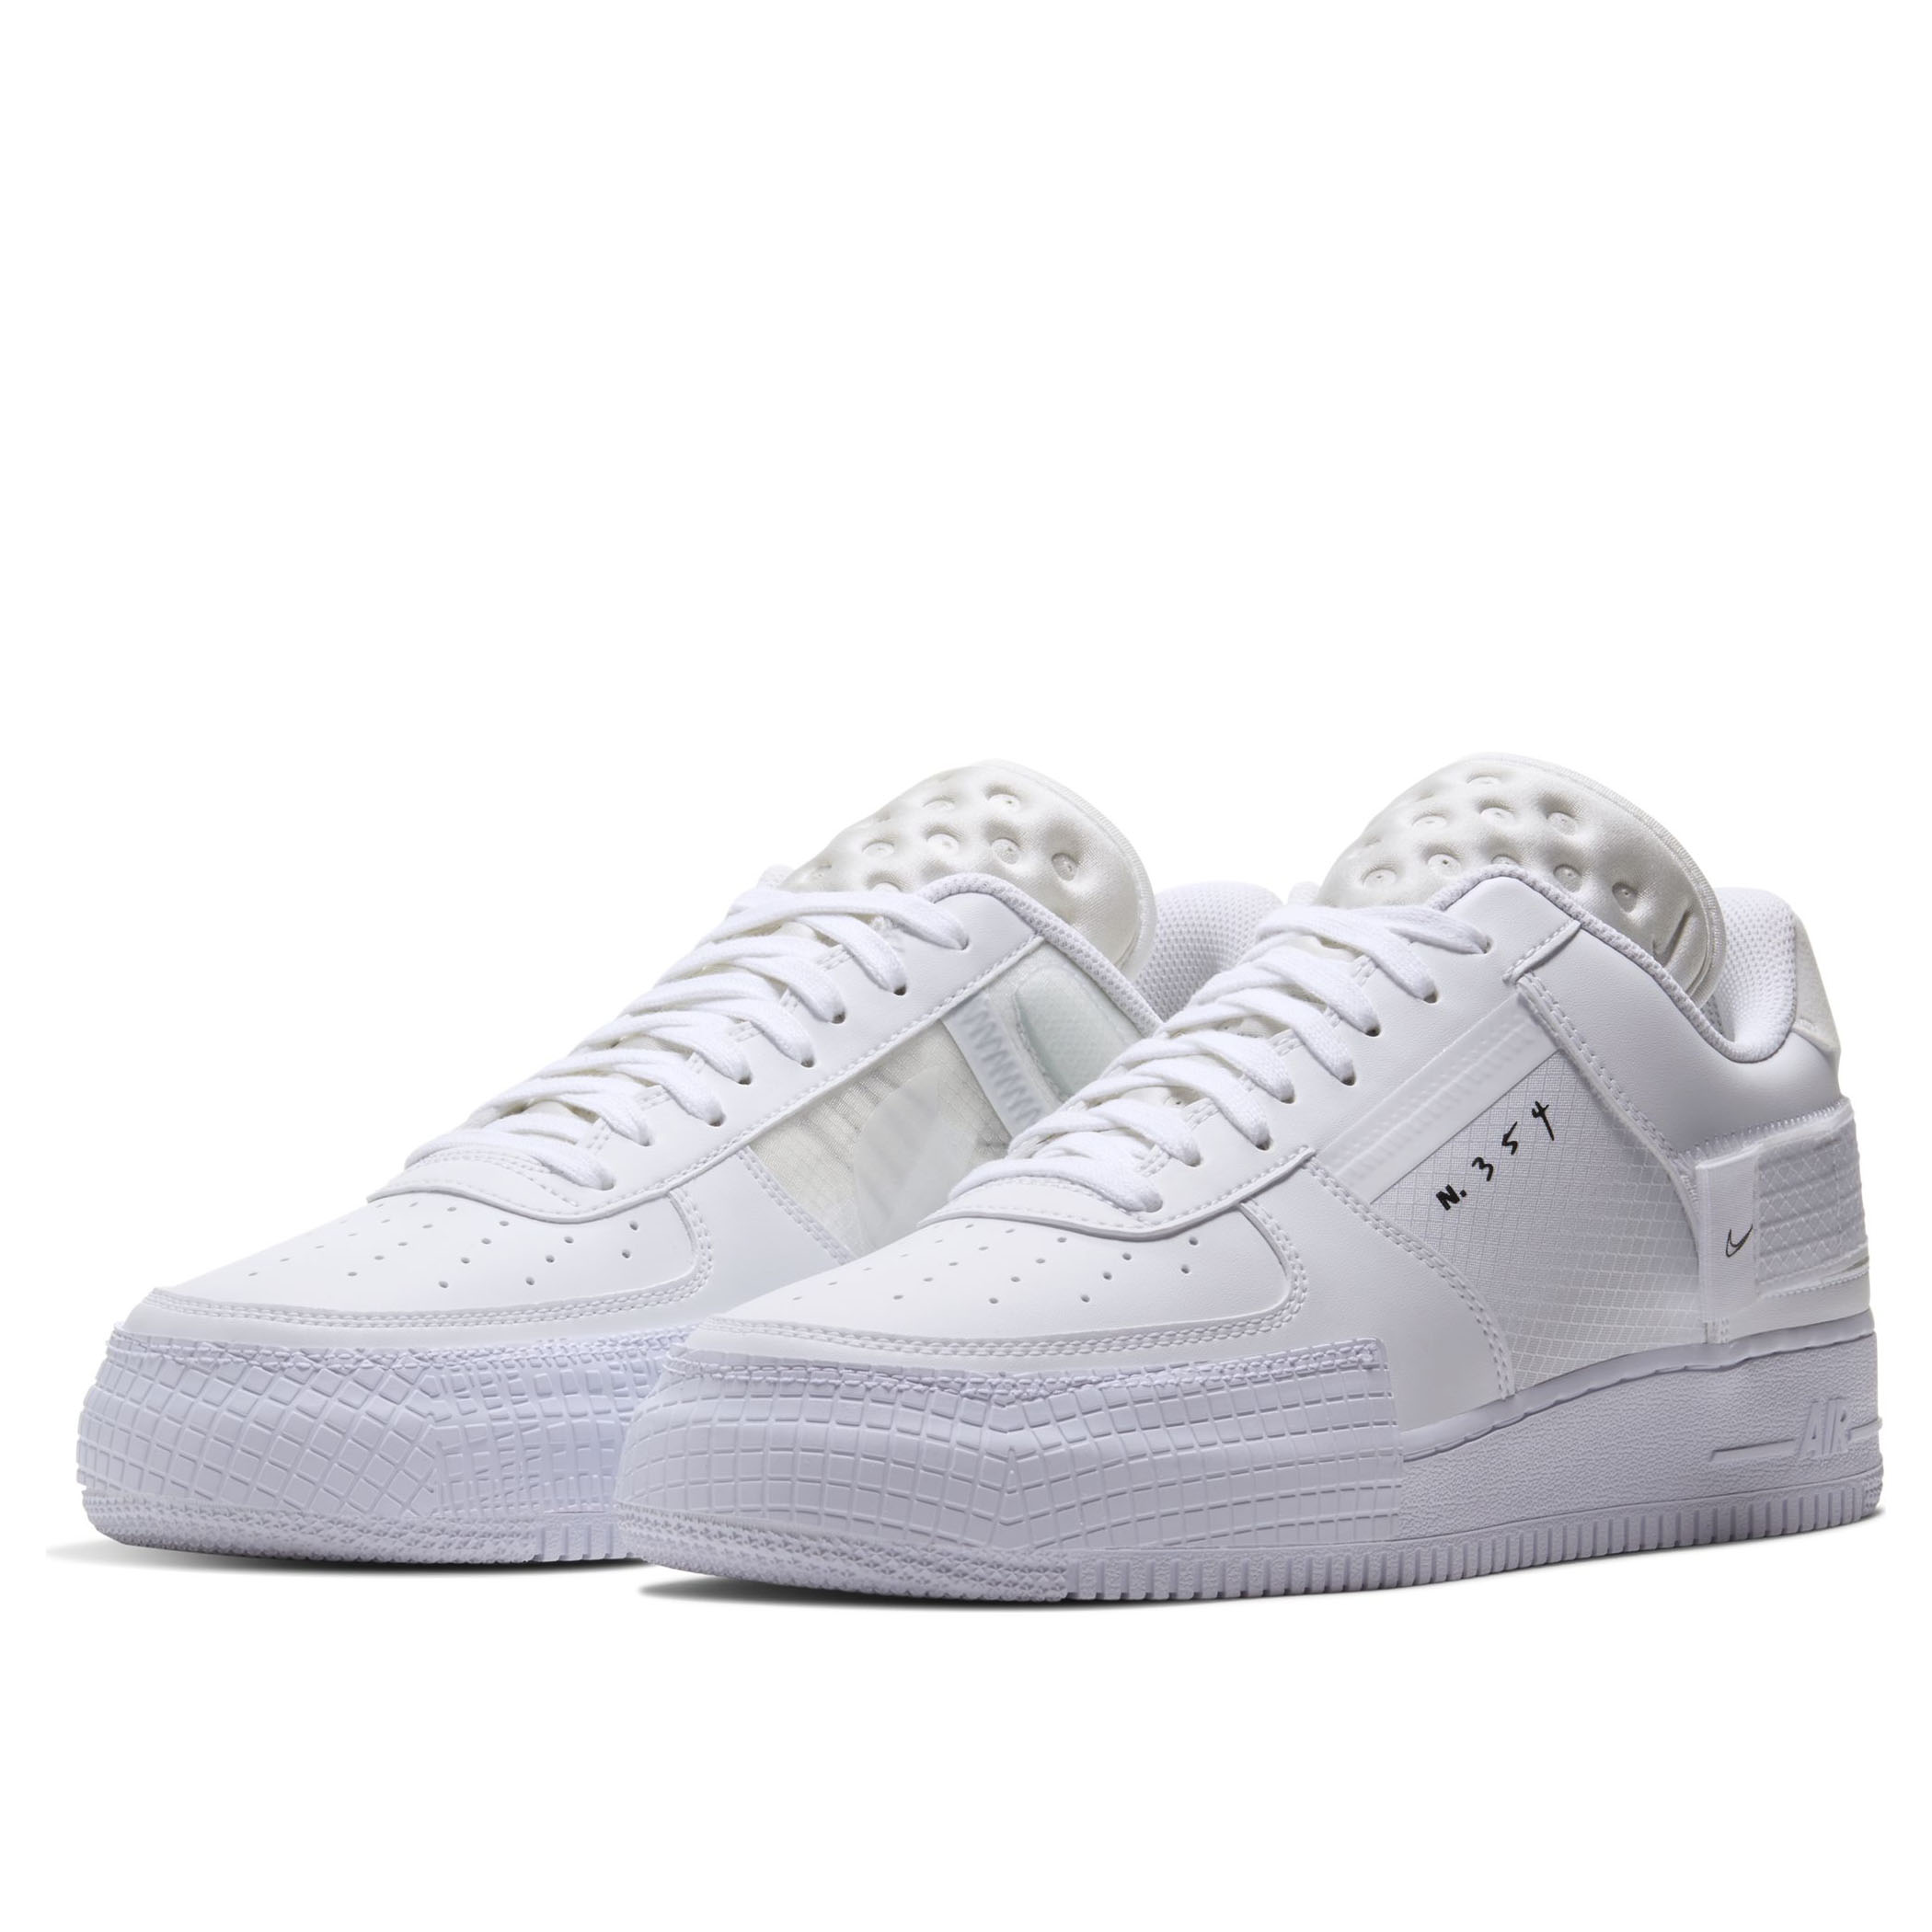 air force 1 type white blue